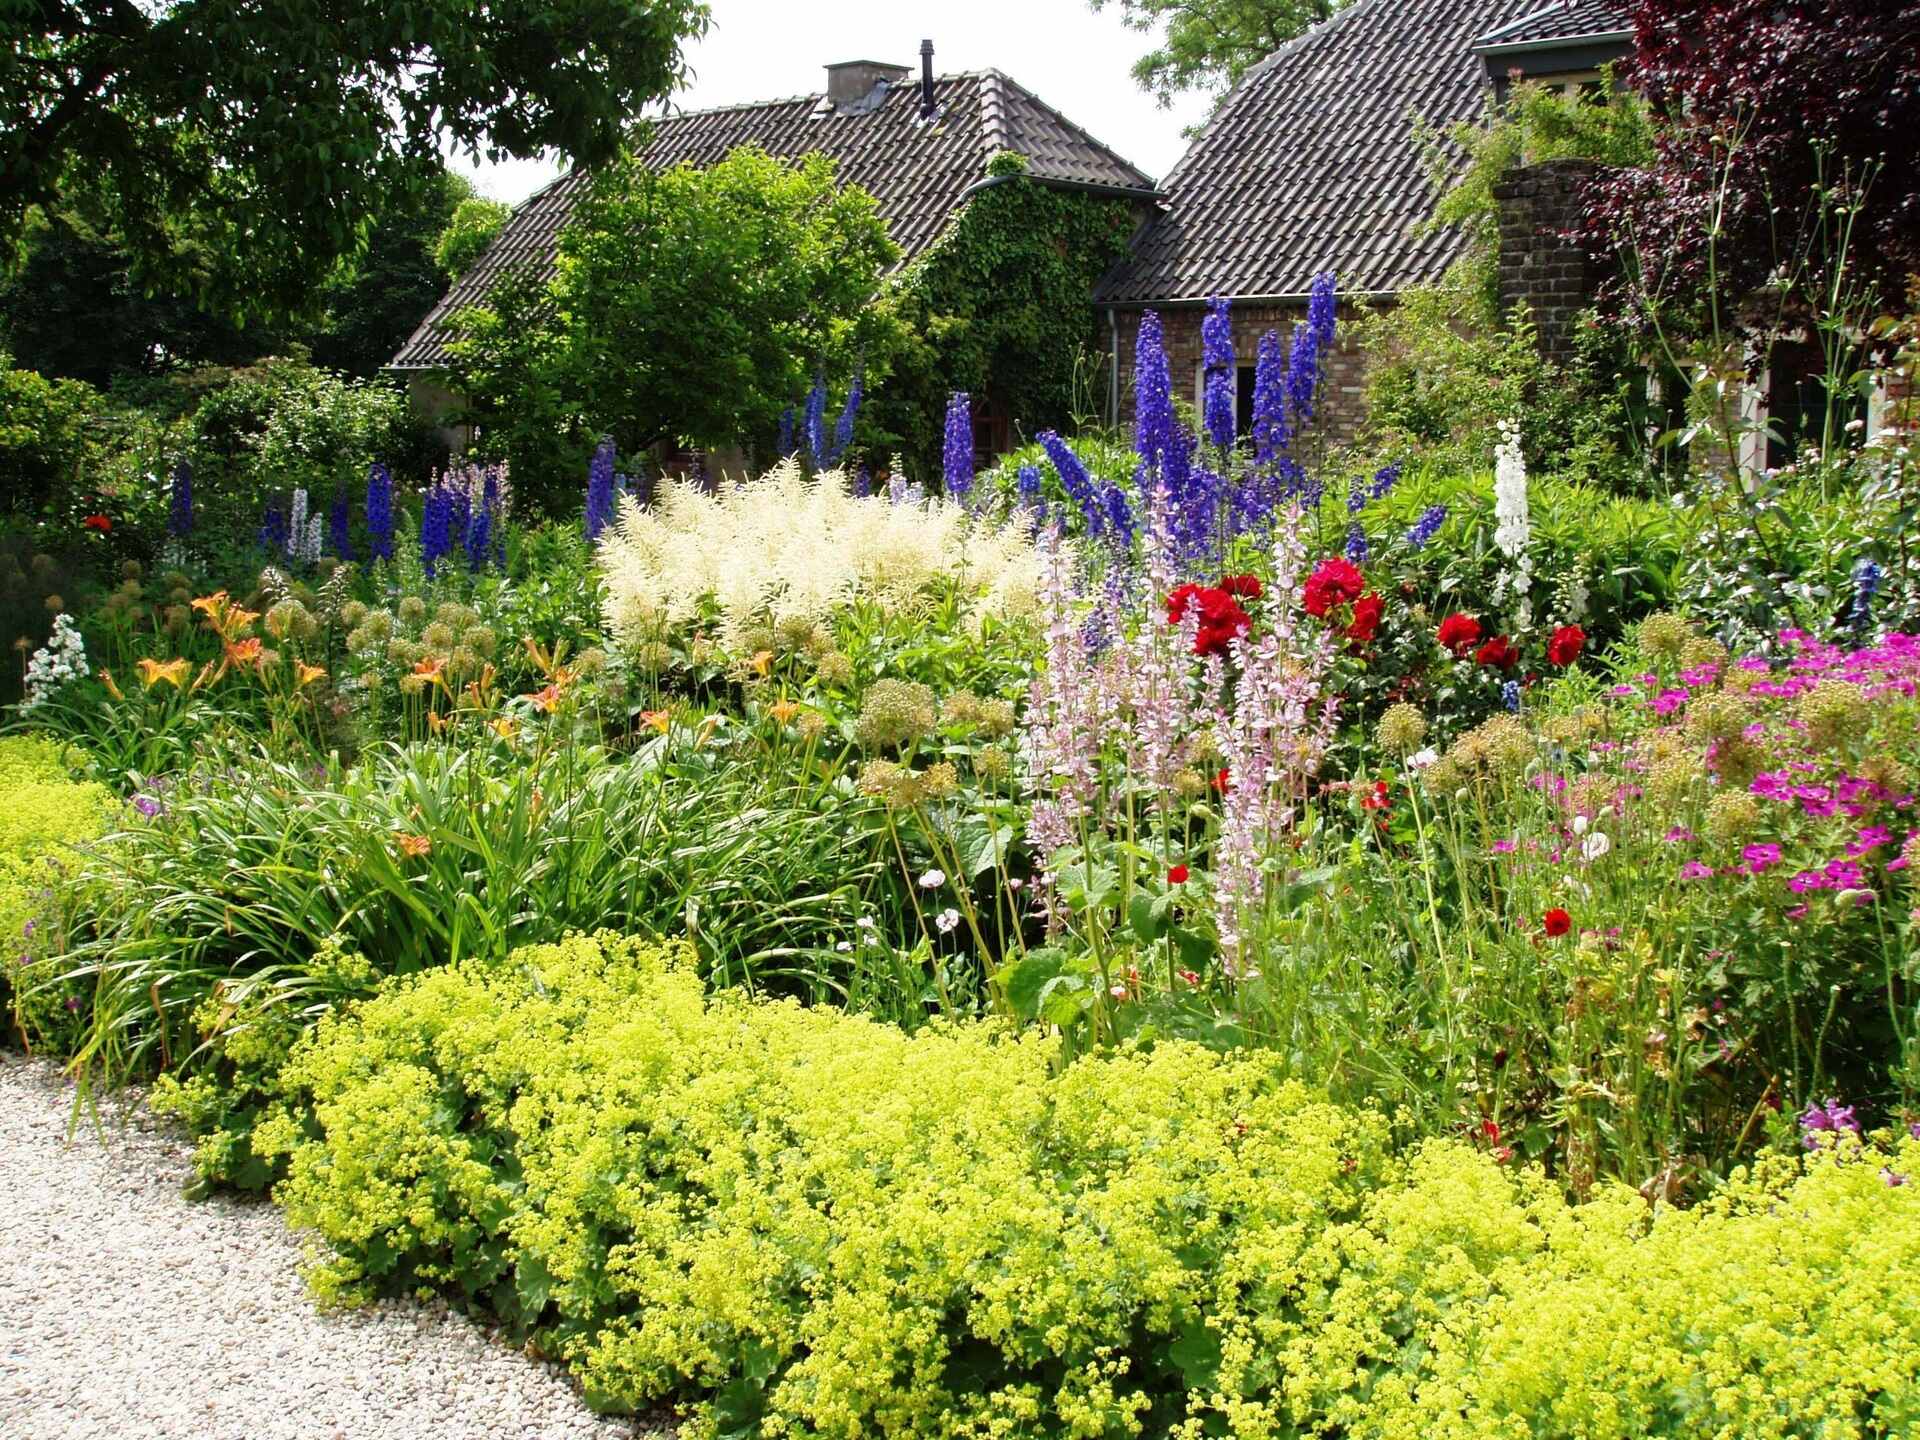 Photograph of a flower garden. The photo shows a well maintained garden bordering a gravel path. A house is partially obscured in the background.